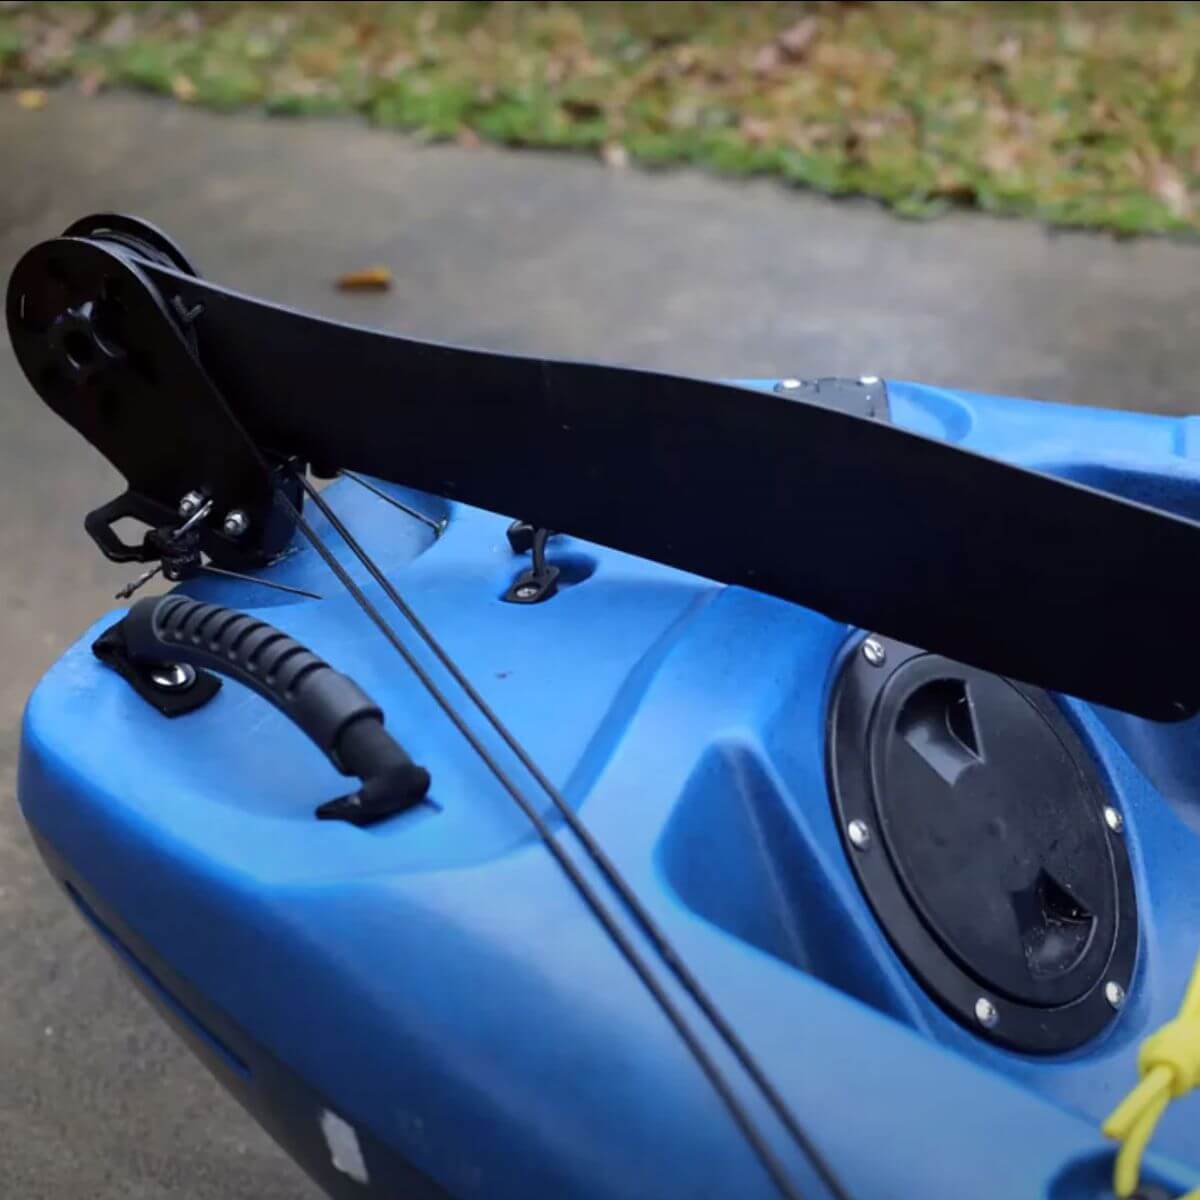 Testing the Waters: The Best 5 Kayak Rudders for Smooth Paddling